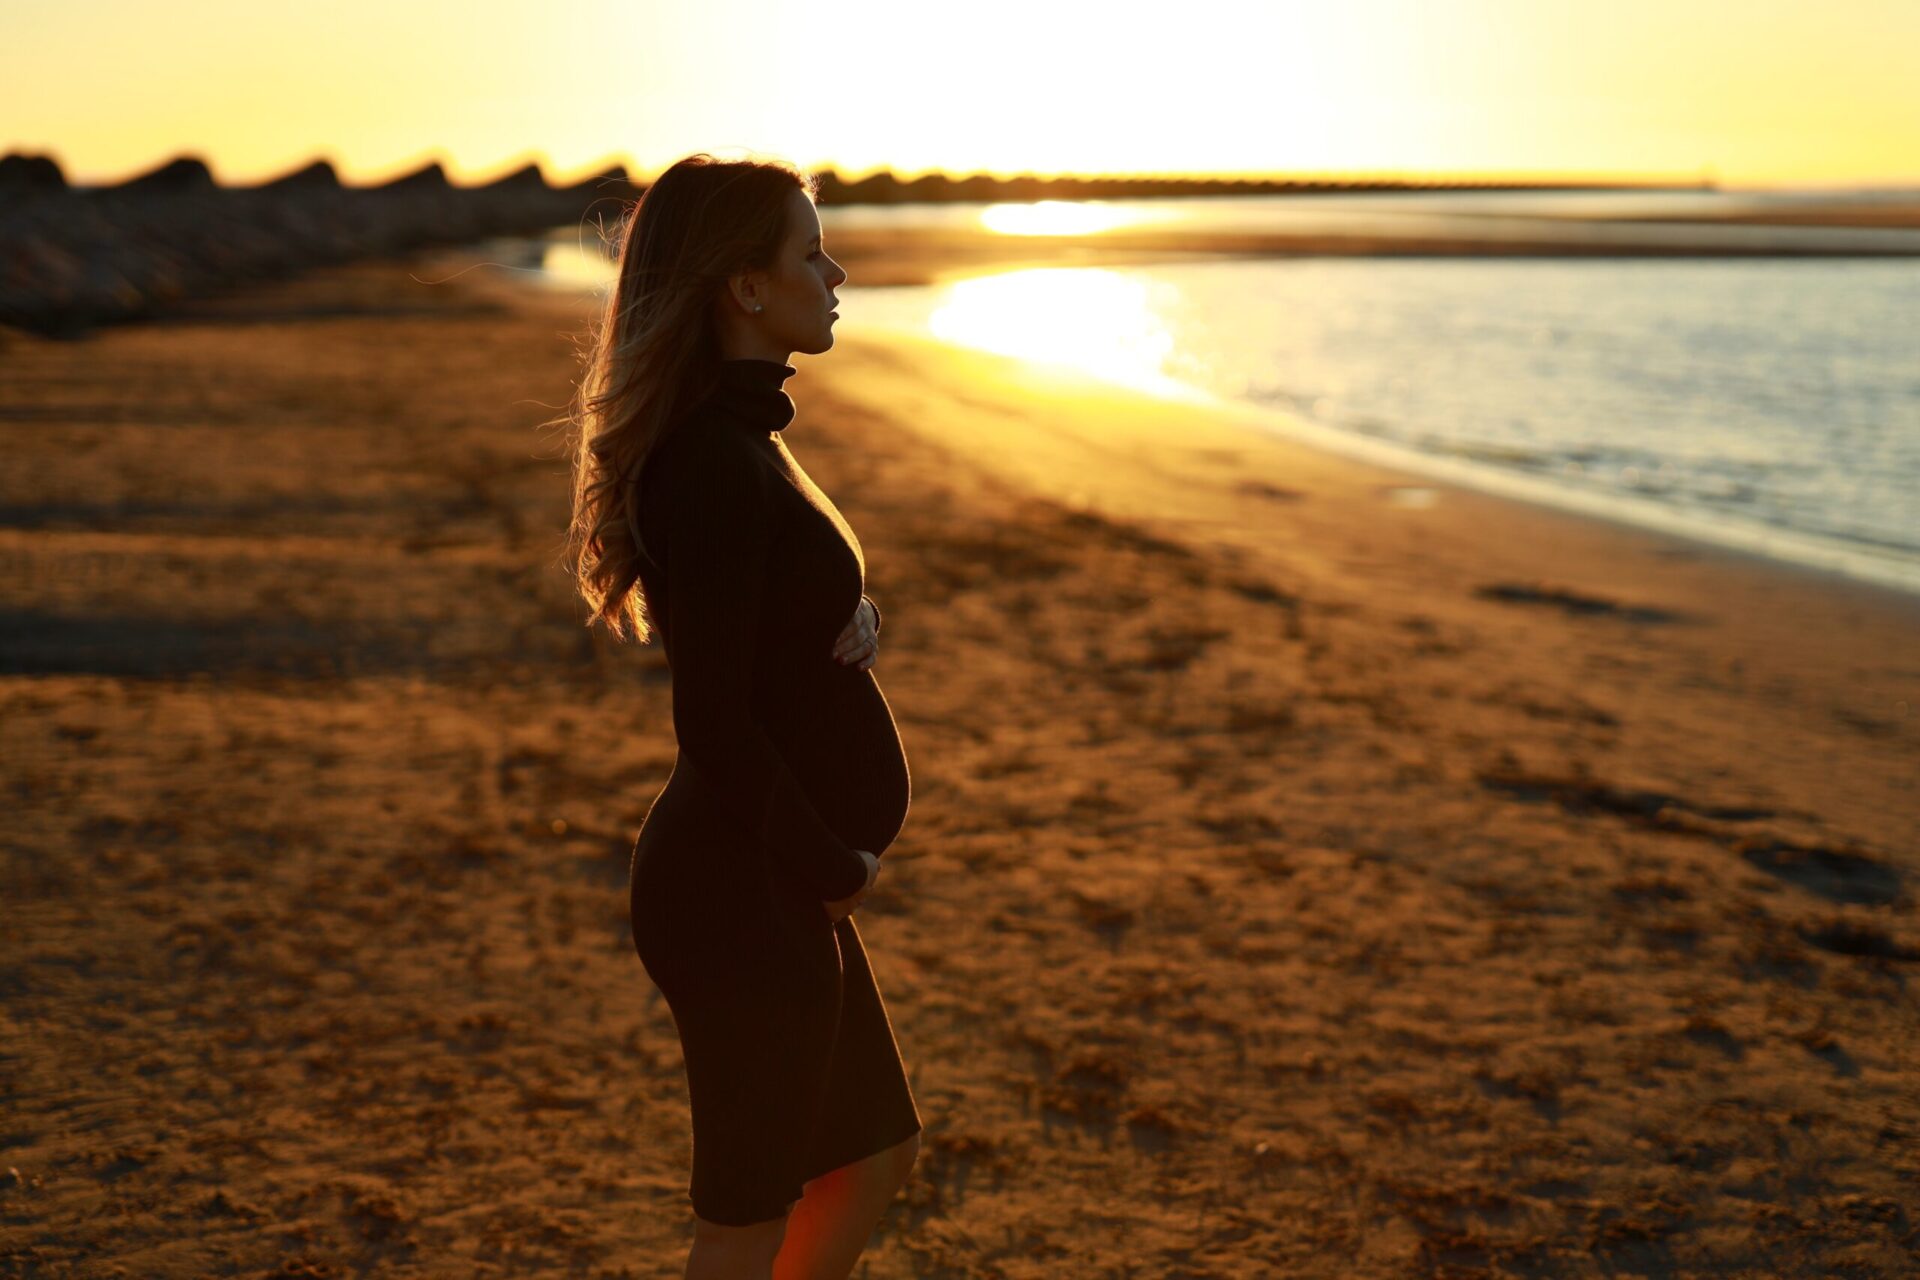 Pregnant woman standing on the beach looks out to the water.